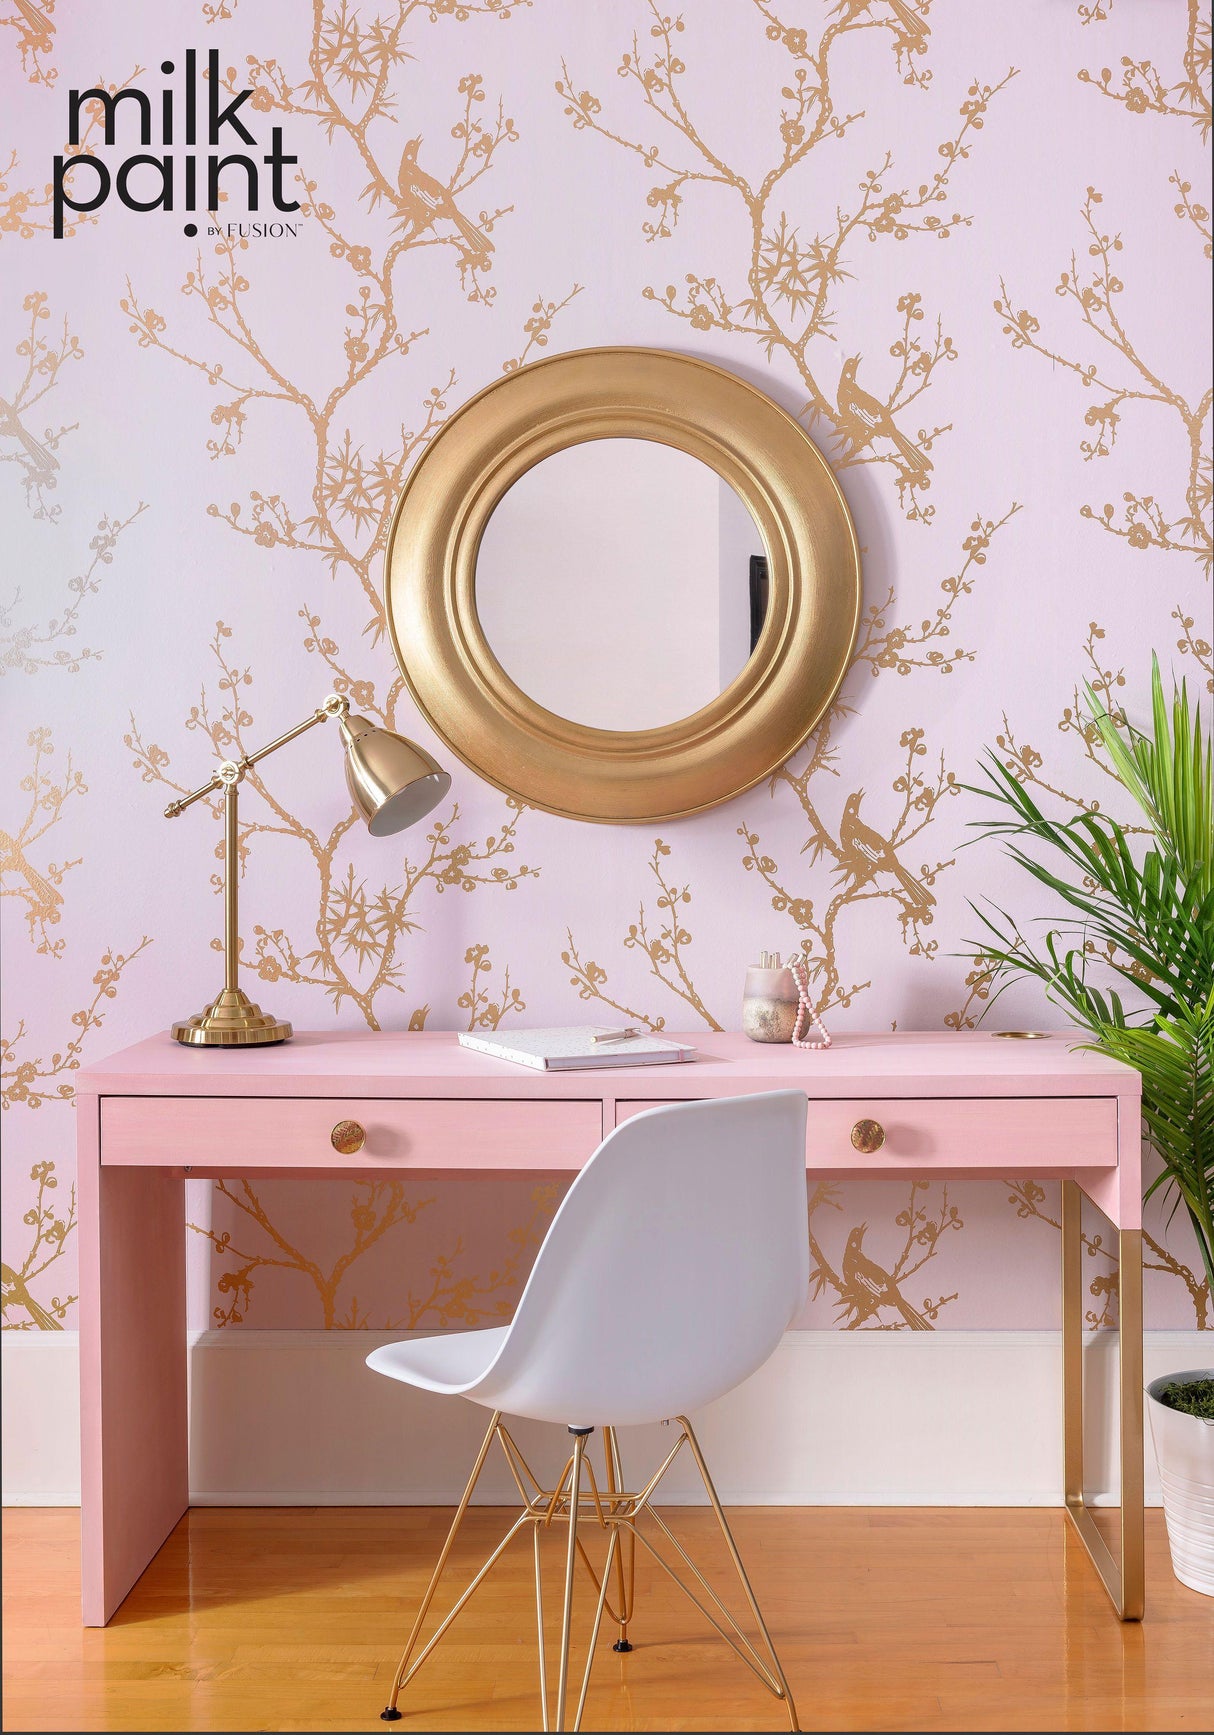 Millennial Pink Milk Paint by Fusion @ Painted Heirloom